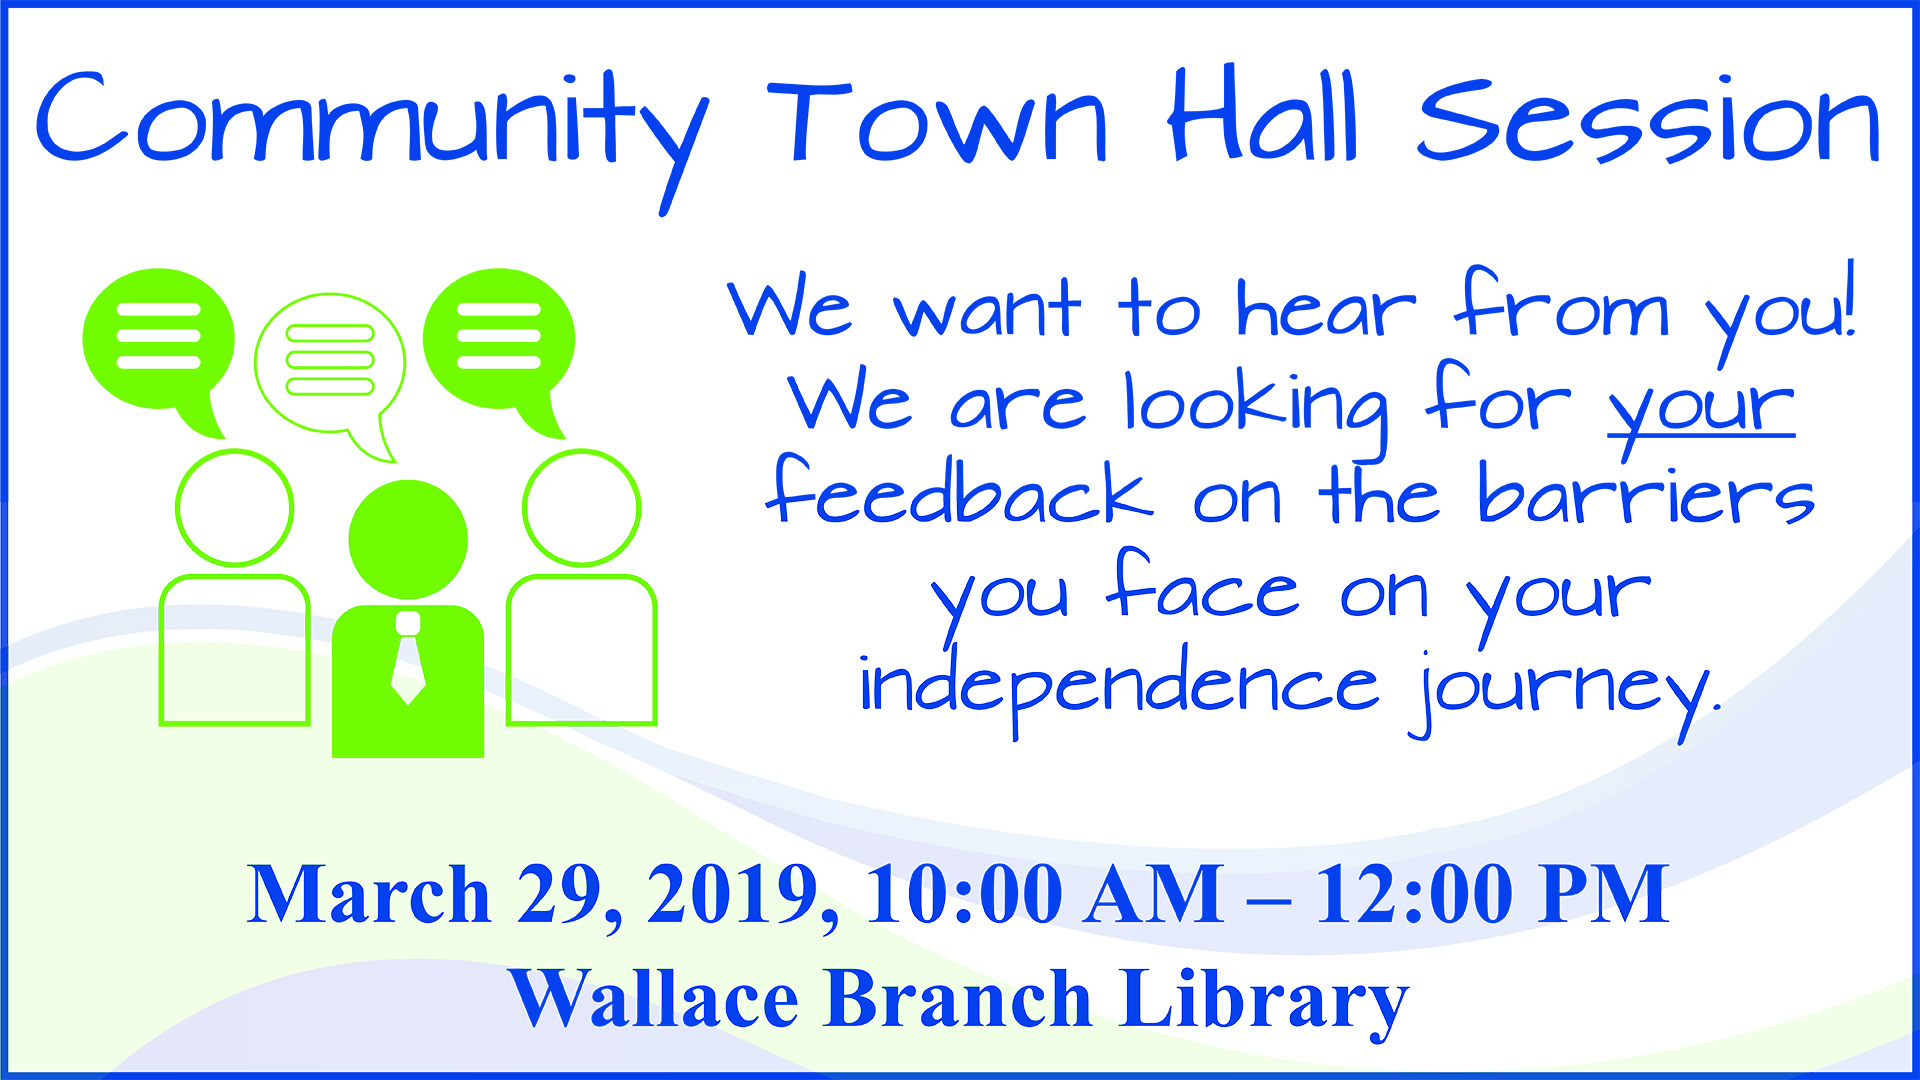 In blue text over the Walton Options color wave: Community Town Hall Session. We want to hear from you! We are looking for your feedback on the barriers you face on you independence journey! March 29. 2019. 10:00 AM to 12:00 PM. Wallace Branc Library. To the left of the text are three green cartoon people symbols with speech bubbles above their heads.